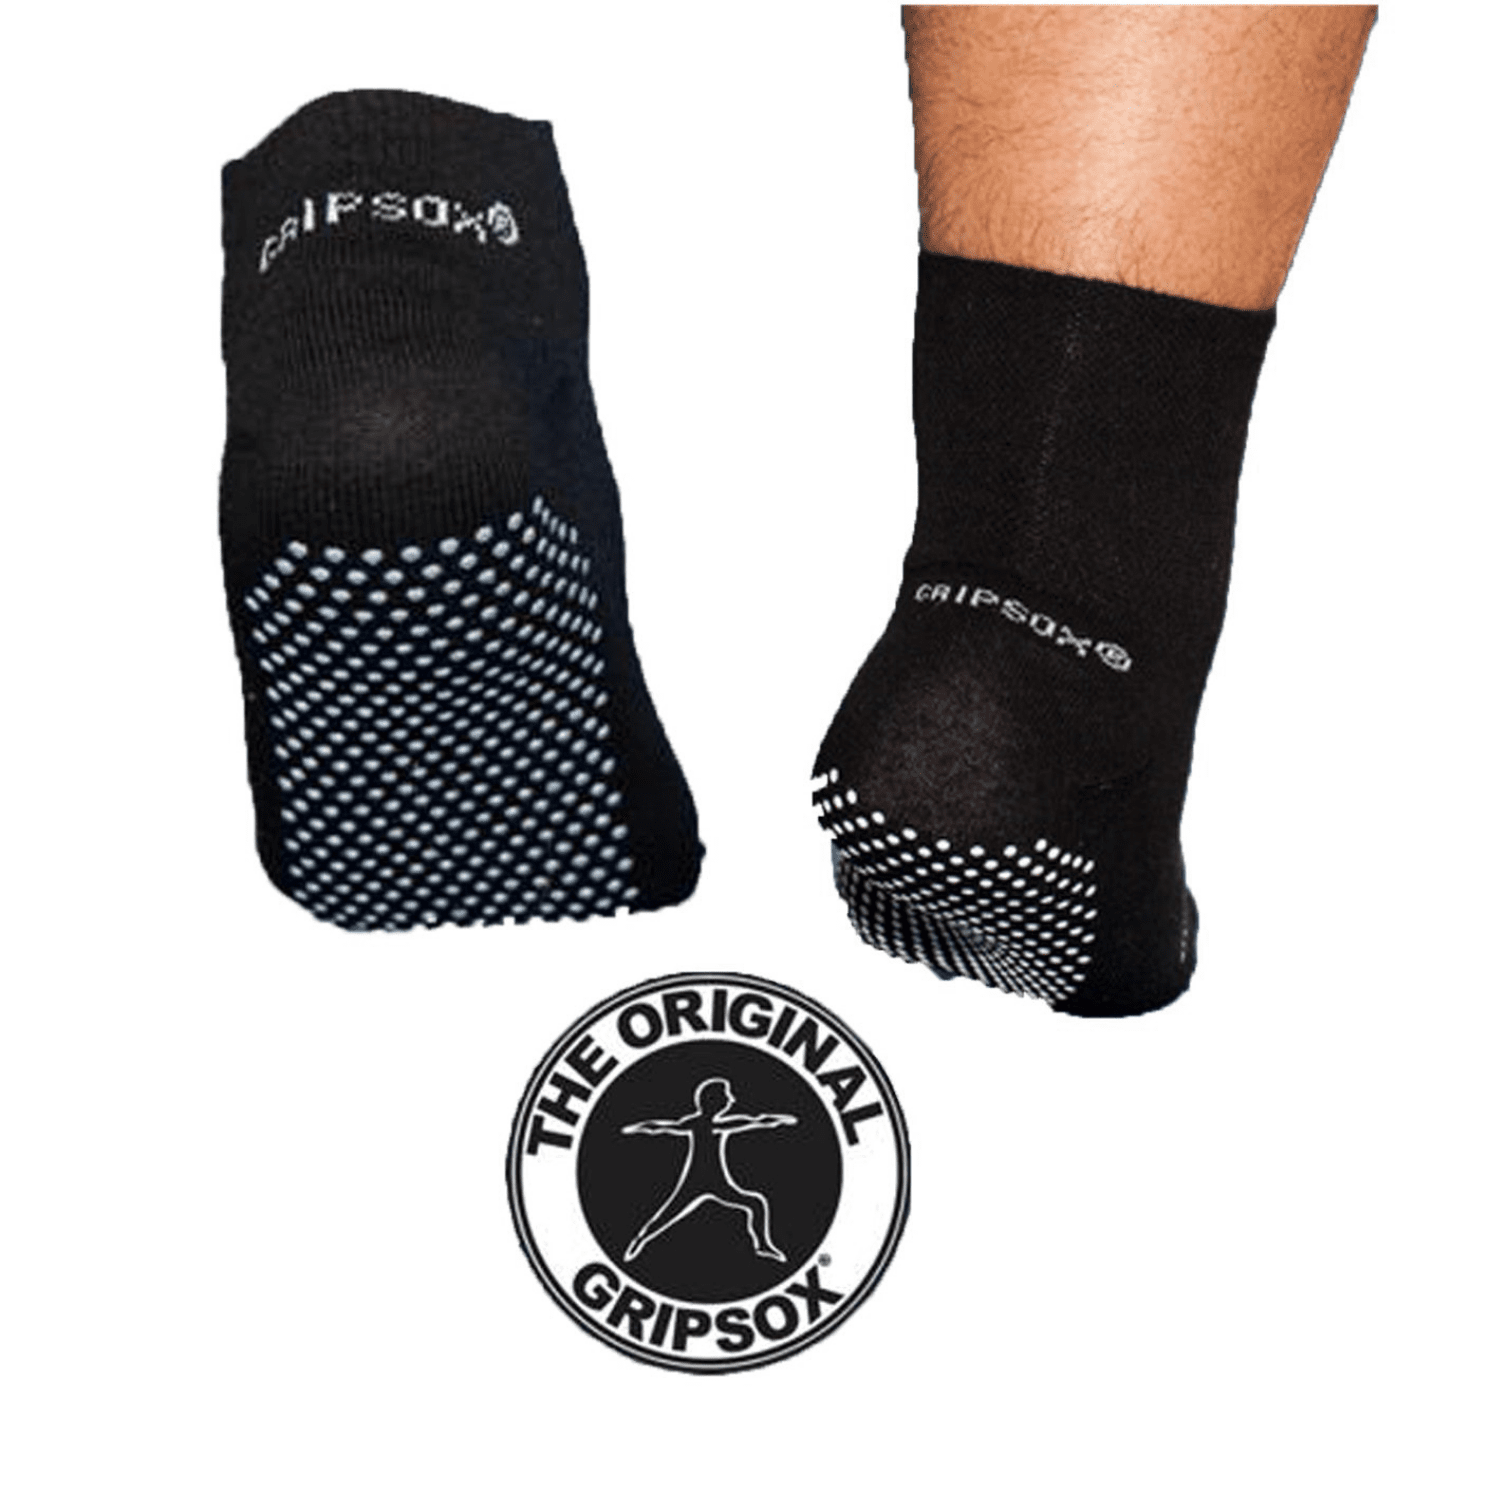 Gripsox Non Slip Safety Socks - Stretch Top - Mobility and Wellness